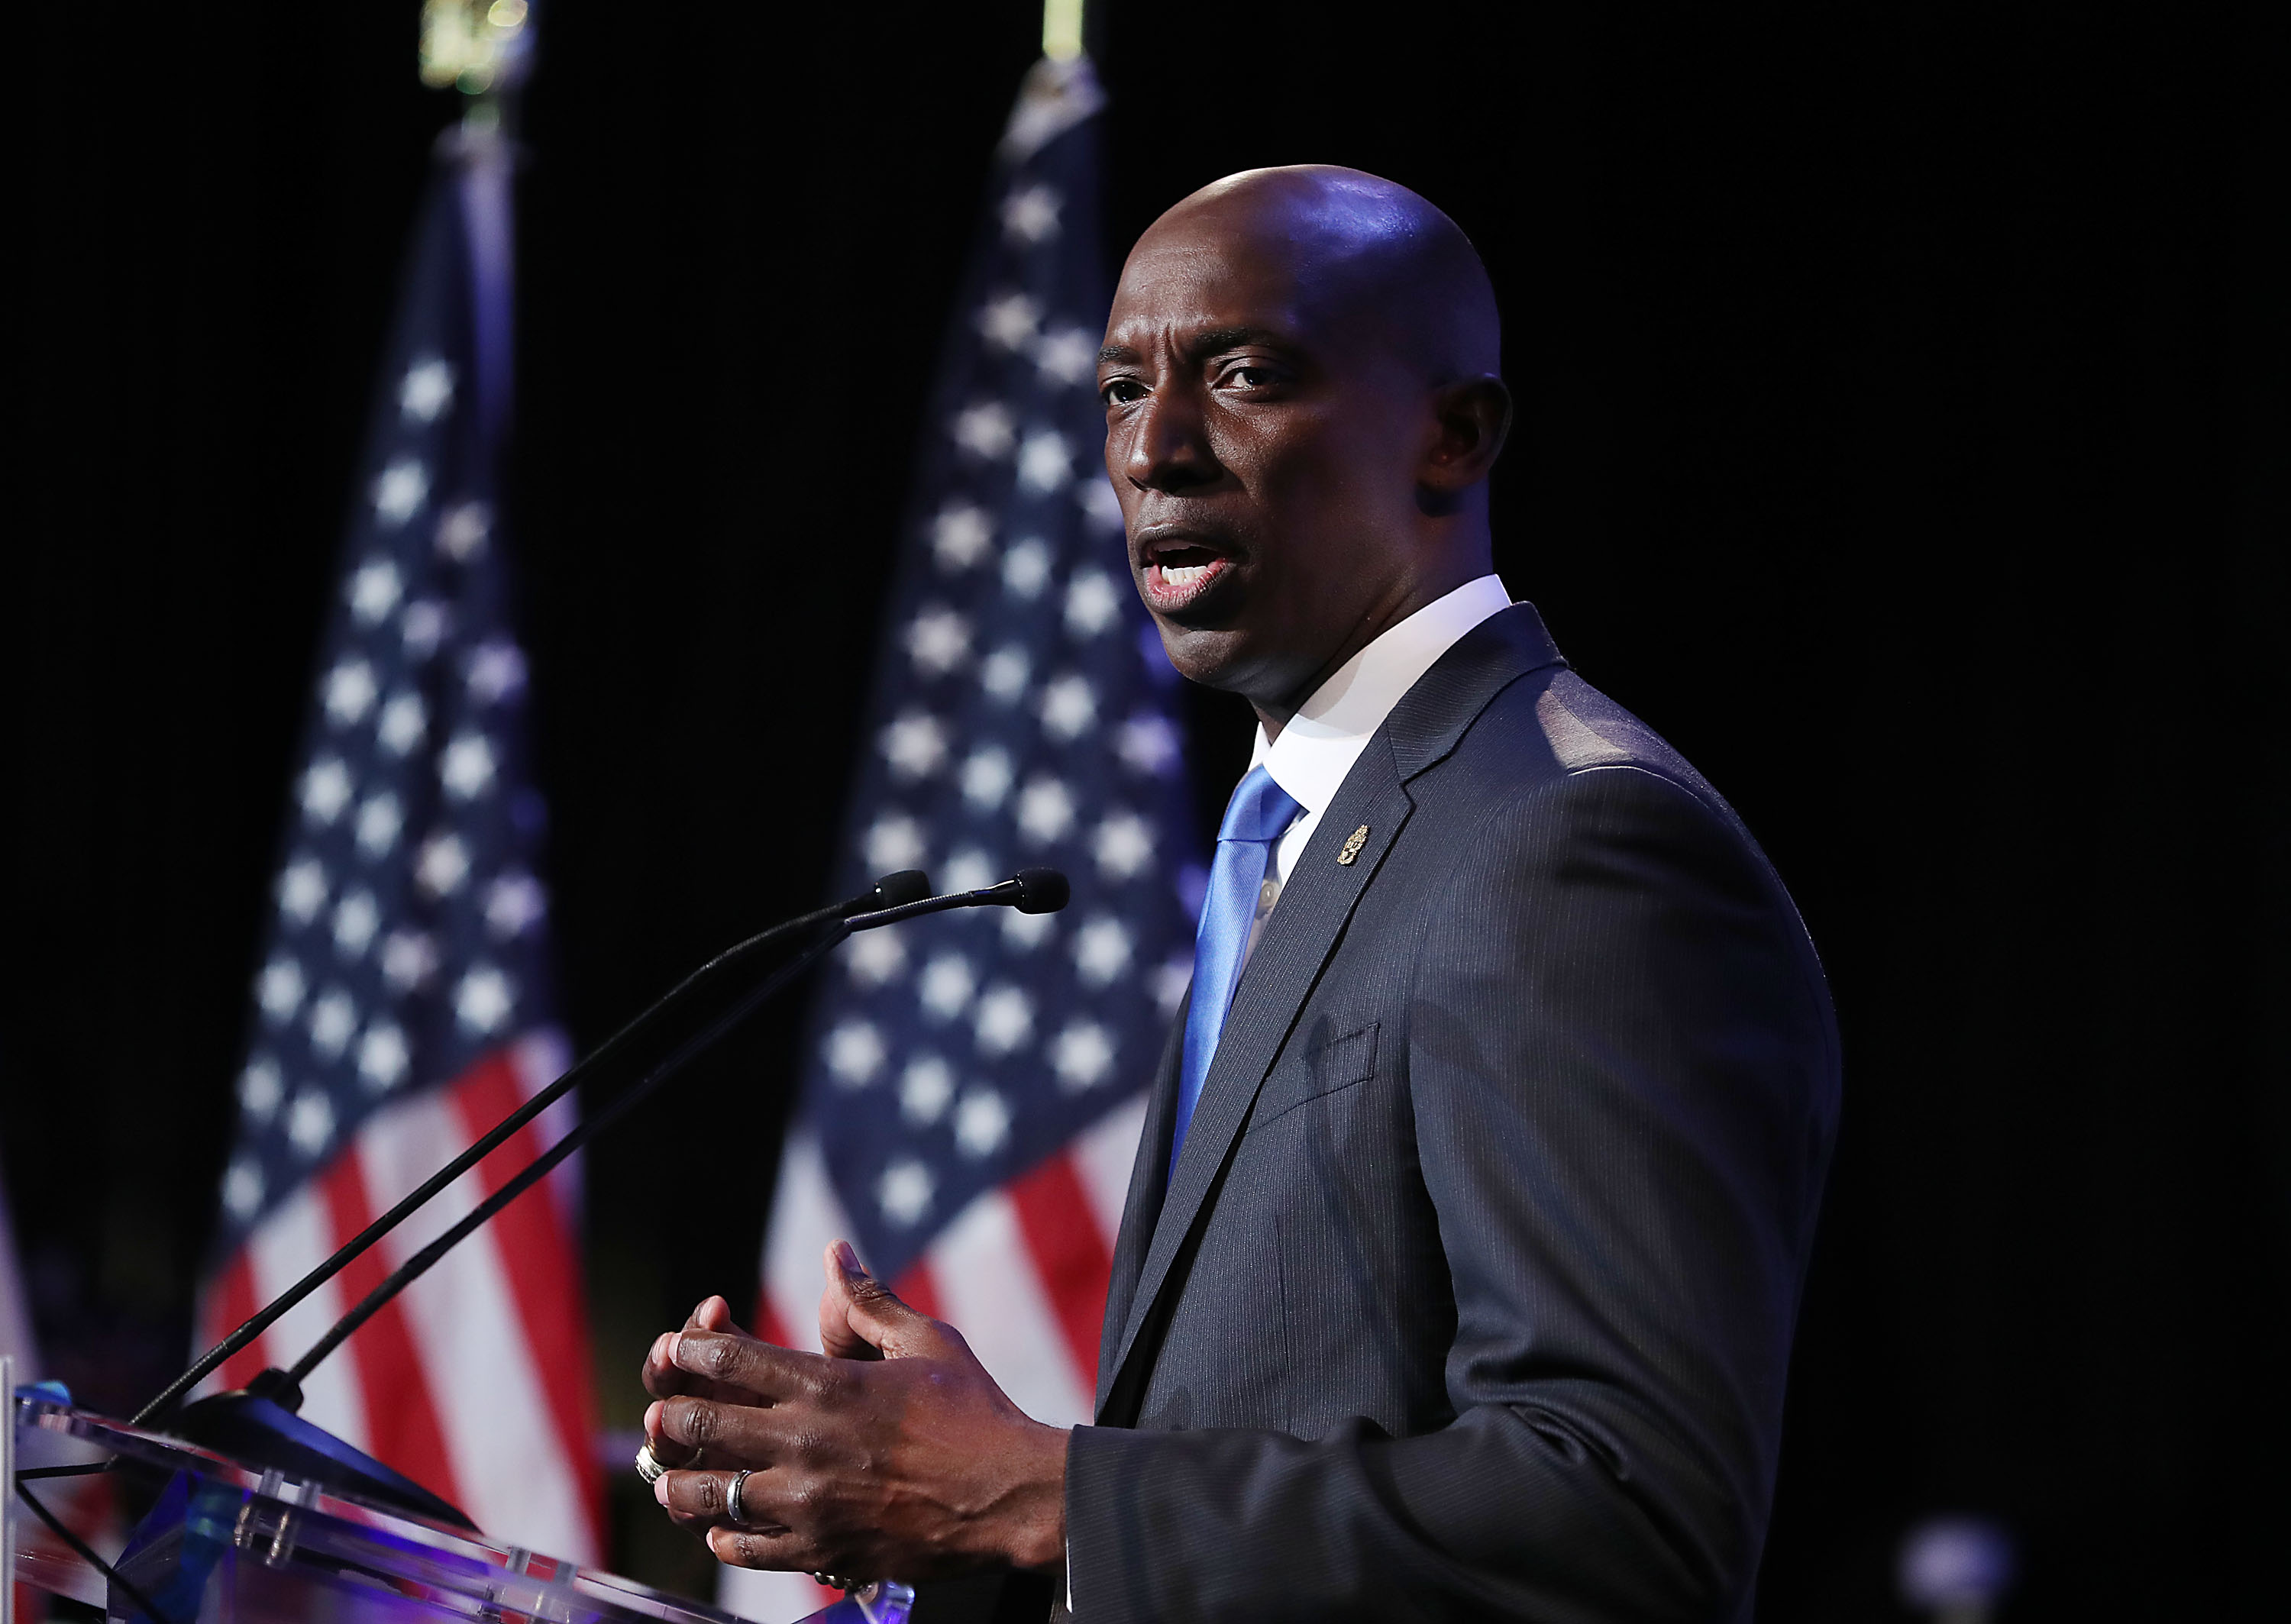 Miramar, Florida Mayor Wayne Messam speaks at a rally at Florida Memorial University in Miami Gardens, Florida. The Democrat mayor announced his candidacy for president at the rally. (Joe Raedle—Getty Images)